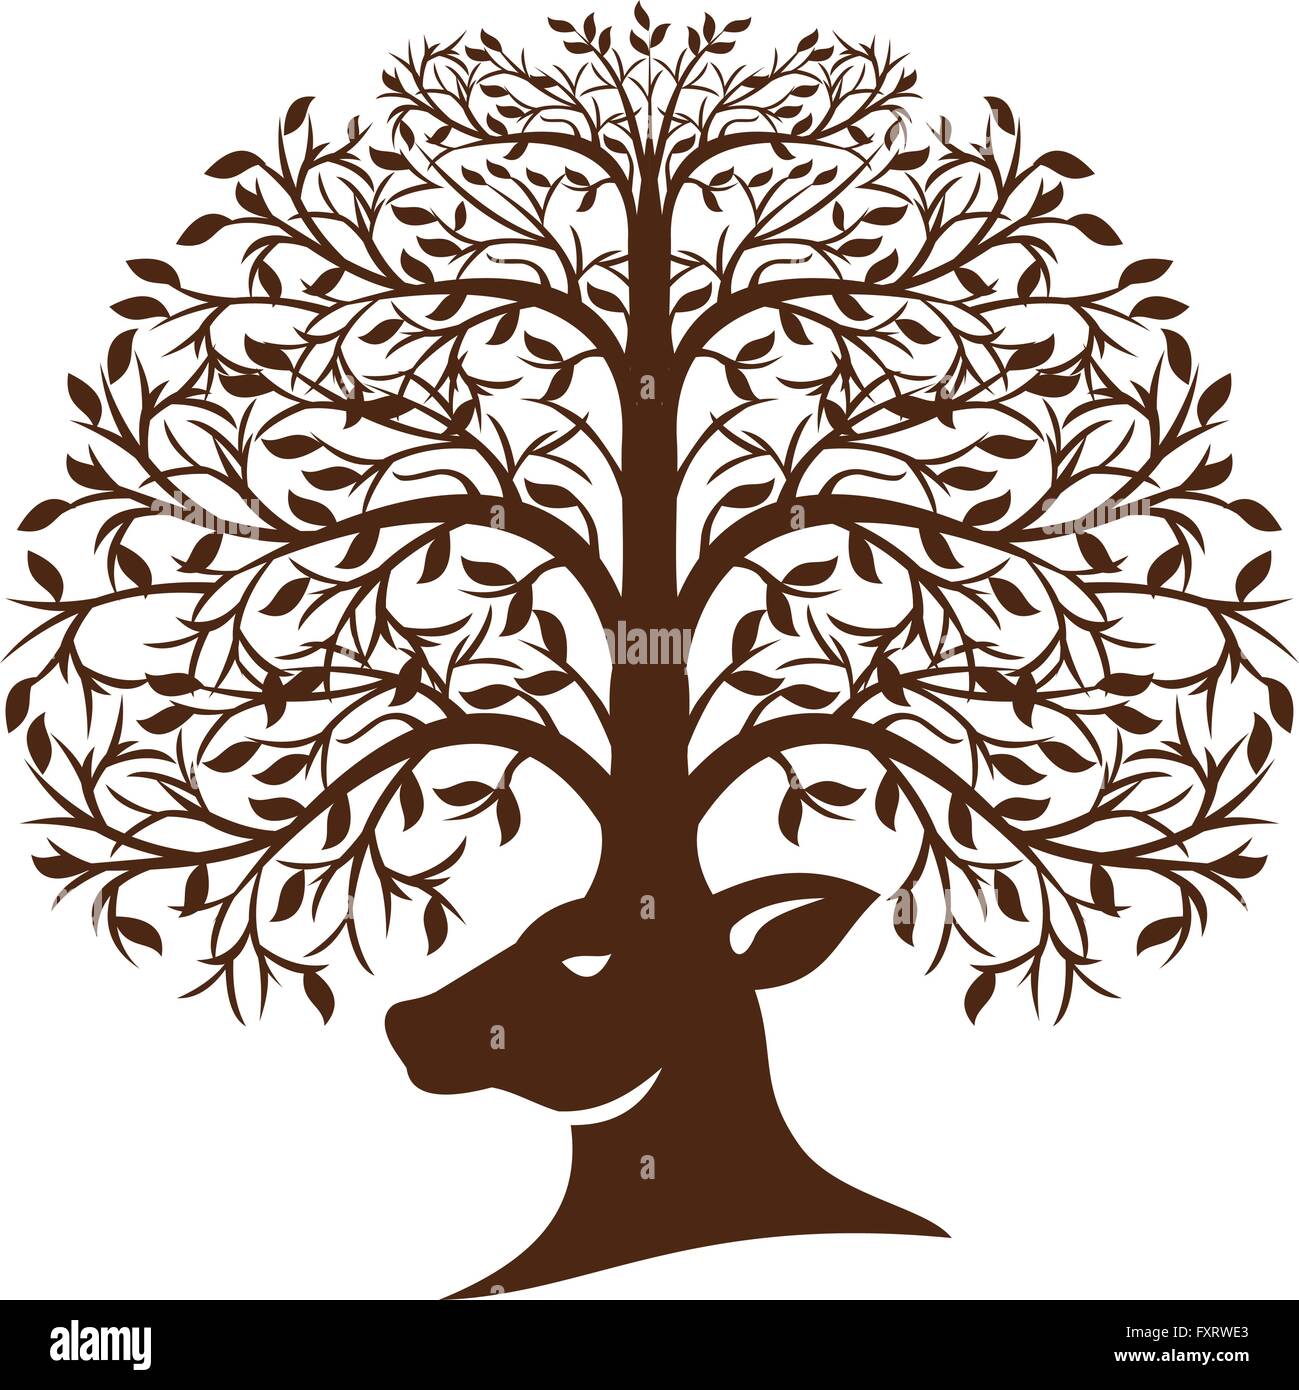 Illustration of a deer head viewed from the side with antler made of trees branches and leaves set on isolated white background Stock Vector